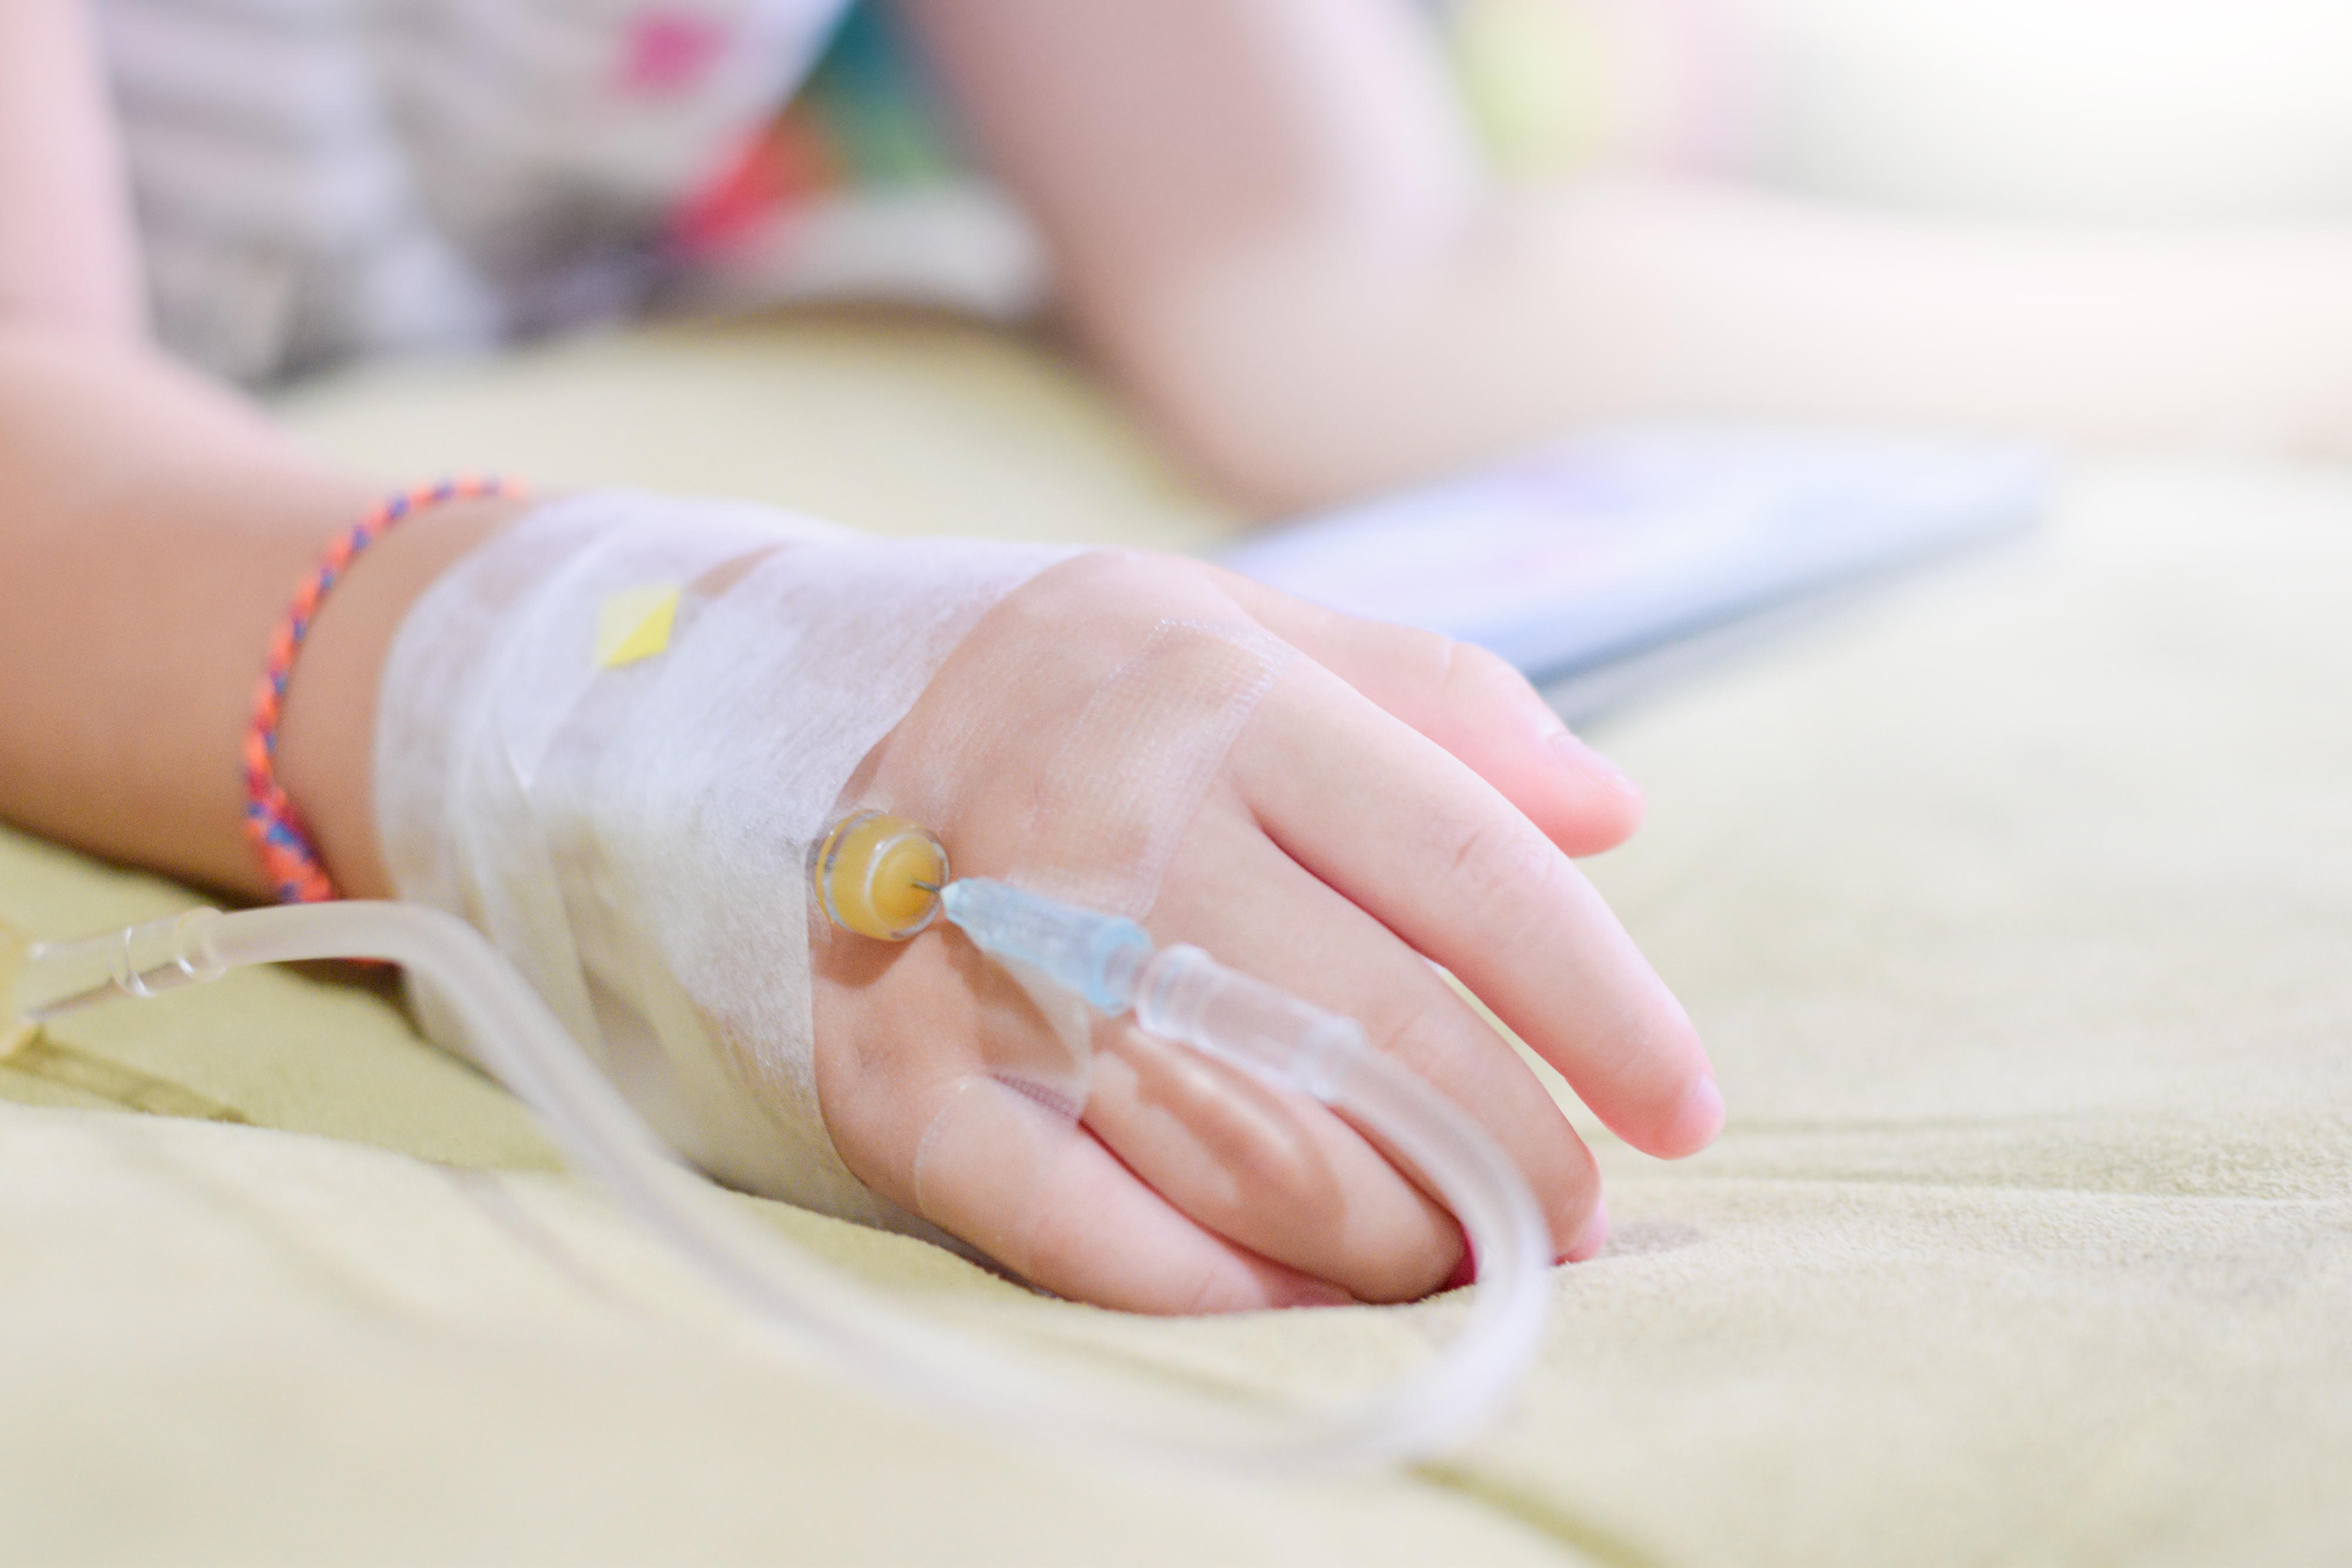 IV solution in a child's patients hand,Close up Children patient's hand receiving iv saline solution in hospital